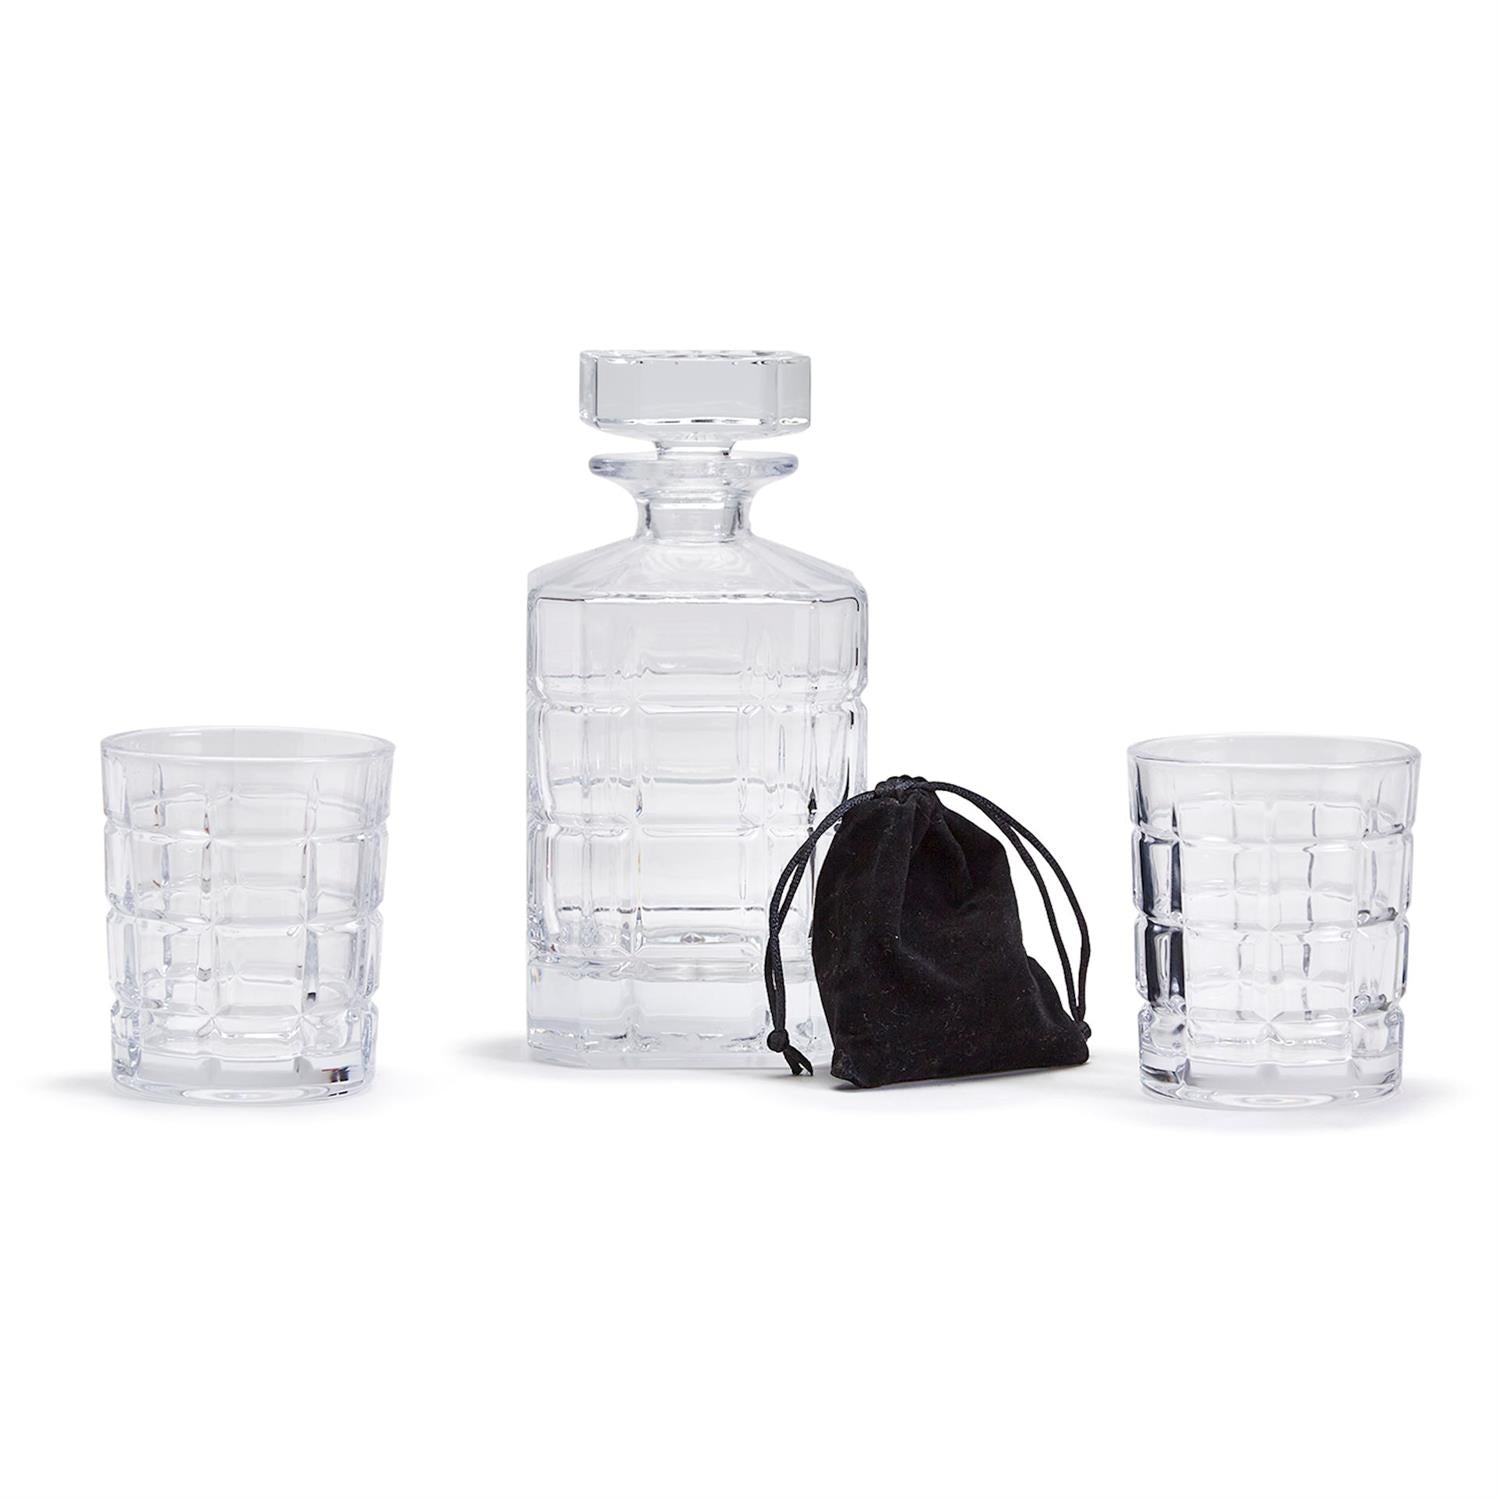 "On the Rocks" Decanter and Glass Gift Set